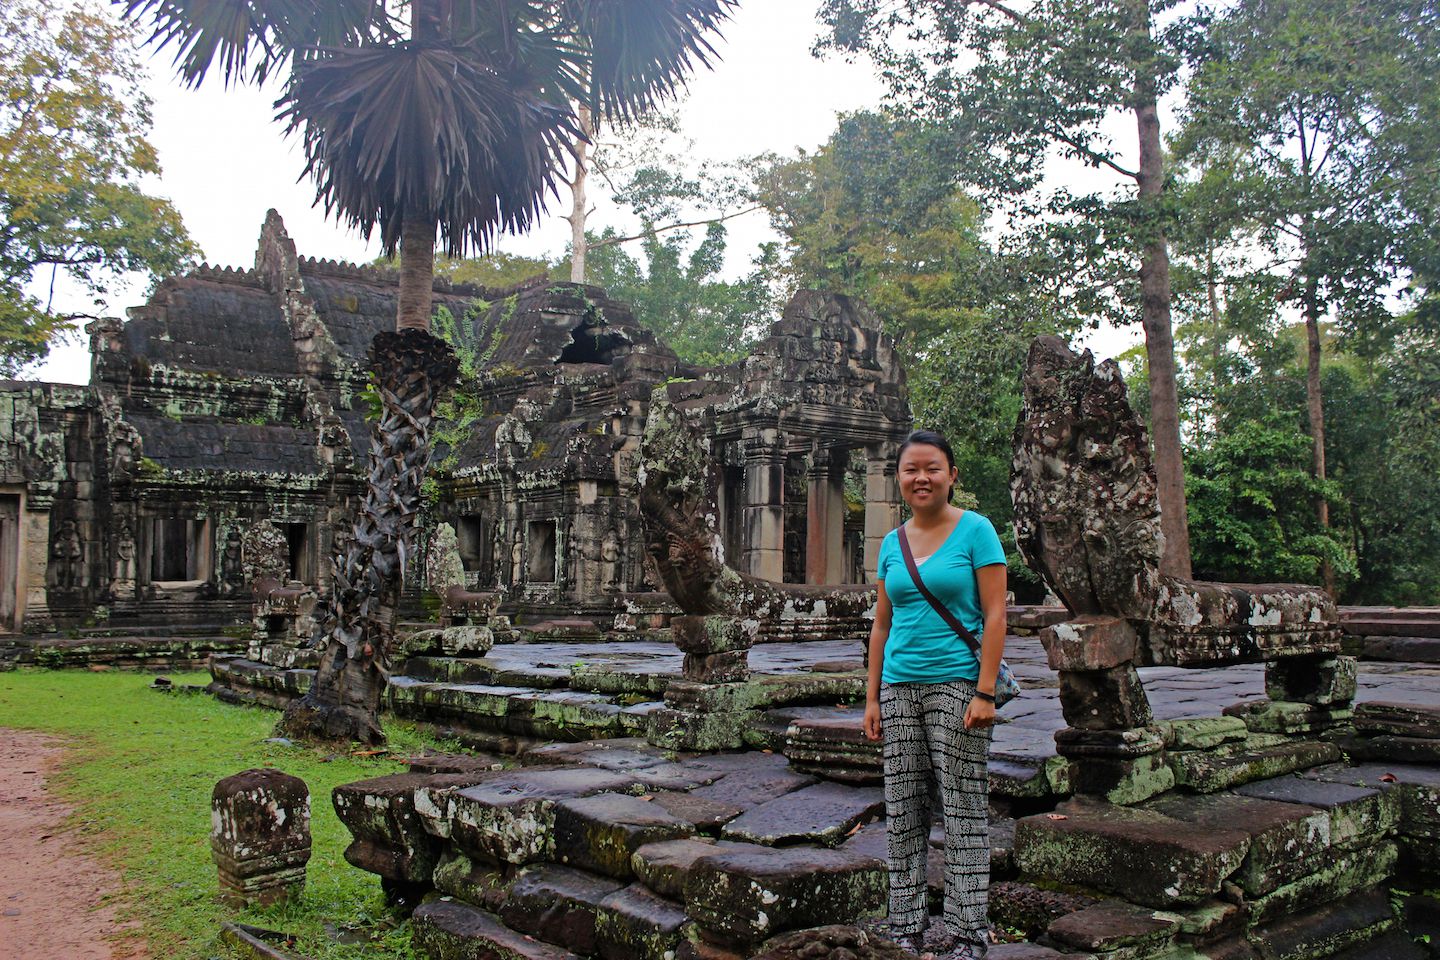 Julie at Banteay Kdei in east Angkor